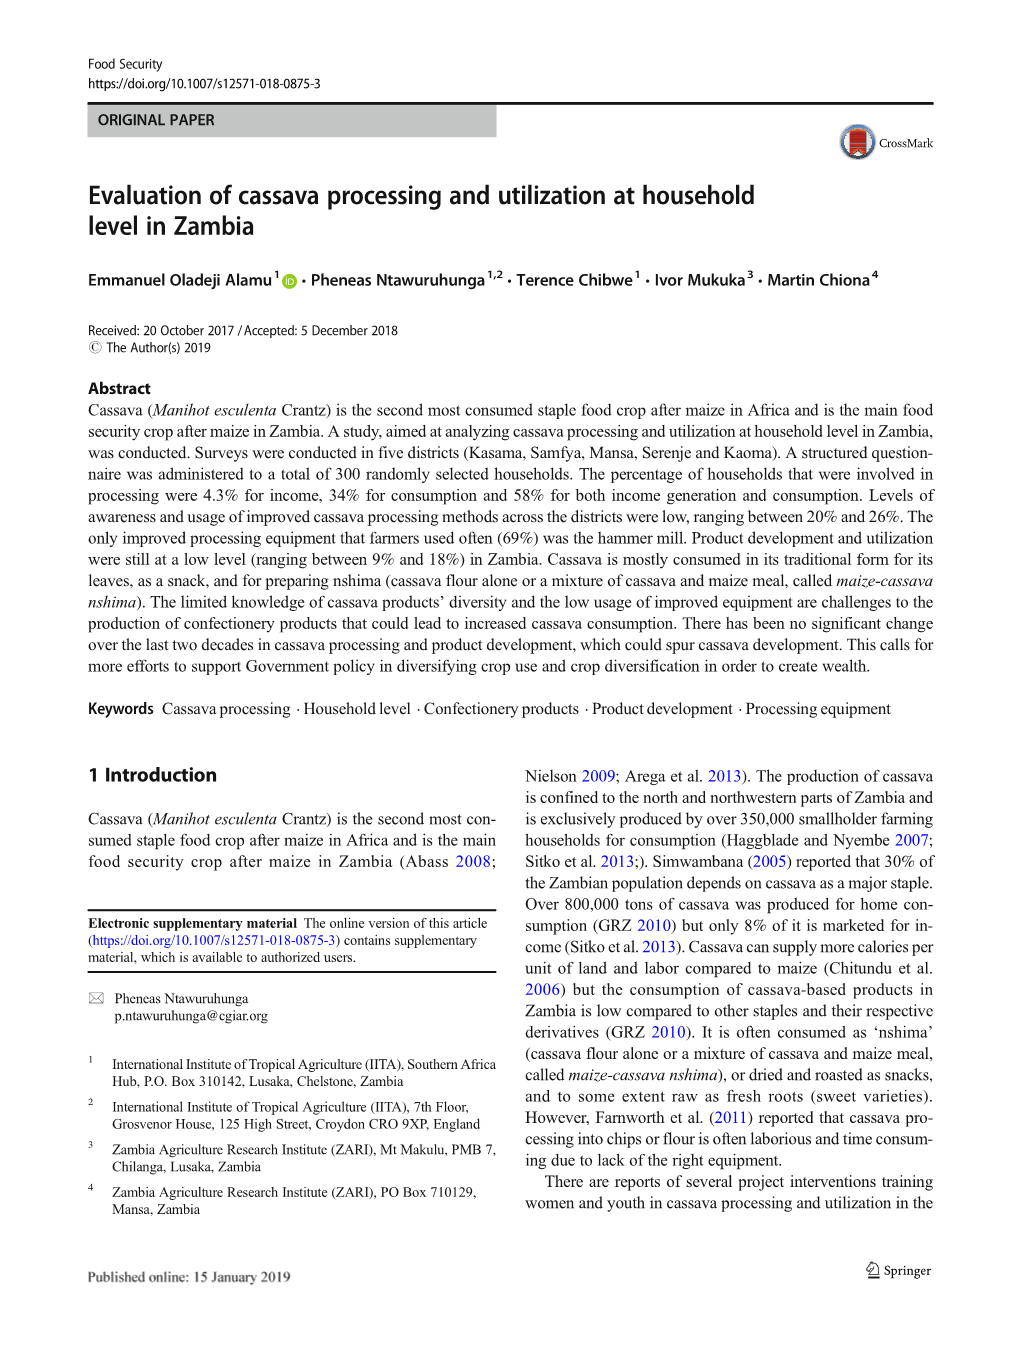 Evaluation of Cassava Processing and Utilization at Household Level in Zambia